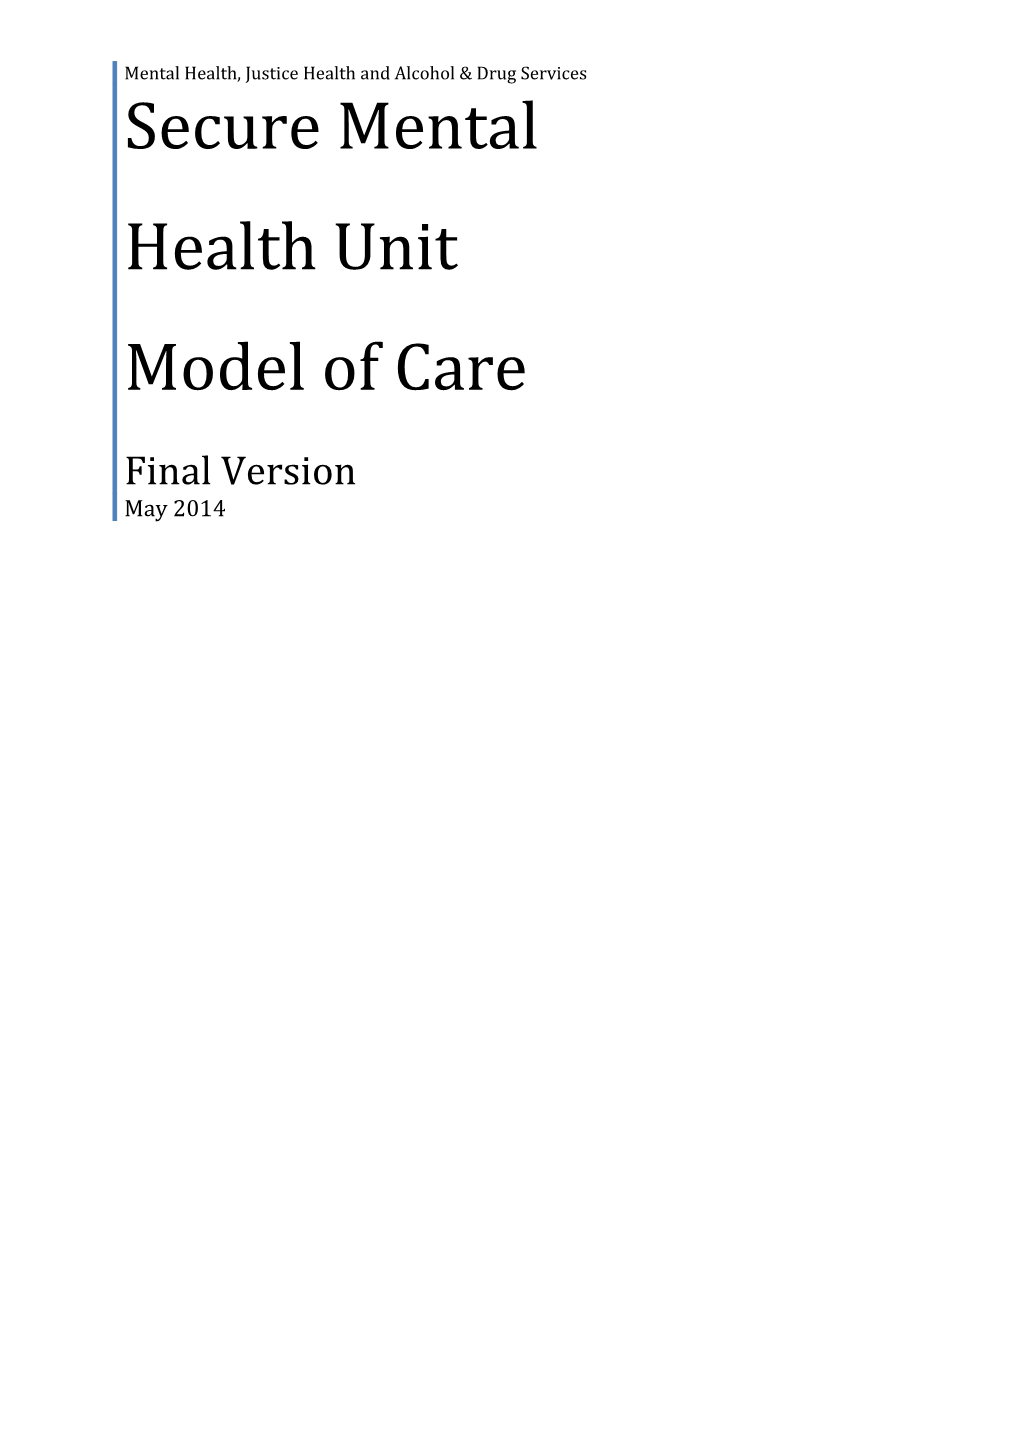 Secure Mental Health Unit Model of Care Preliminary Draft